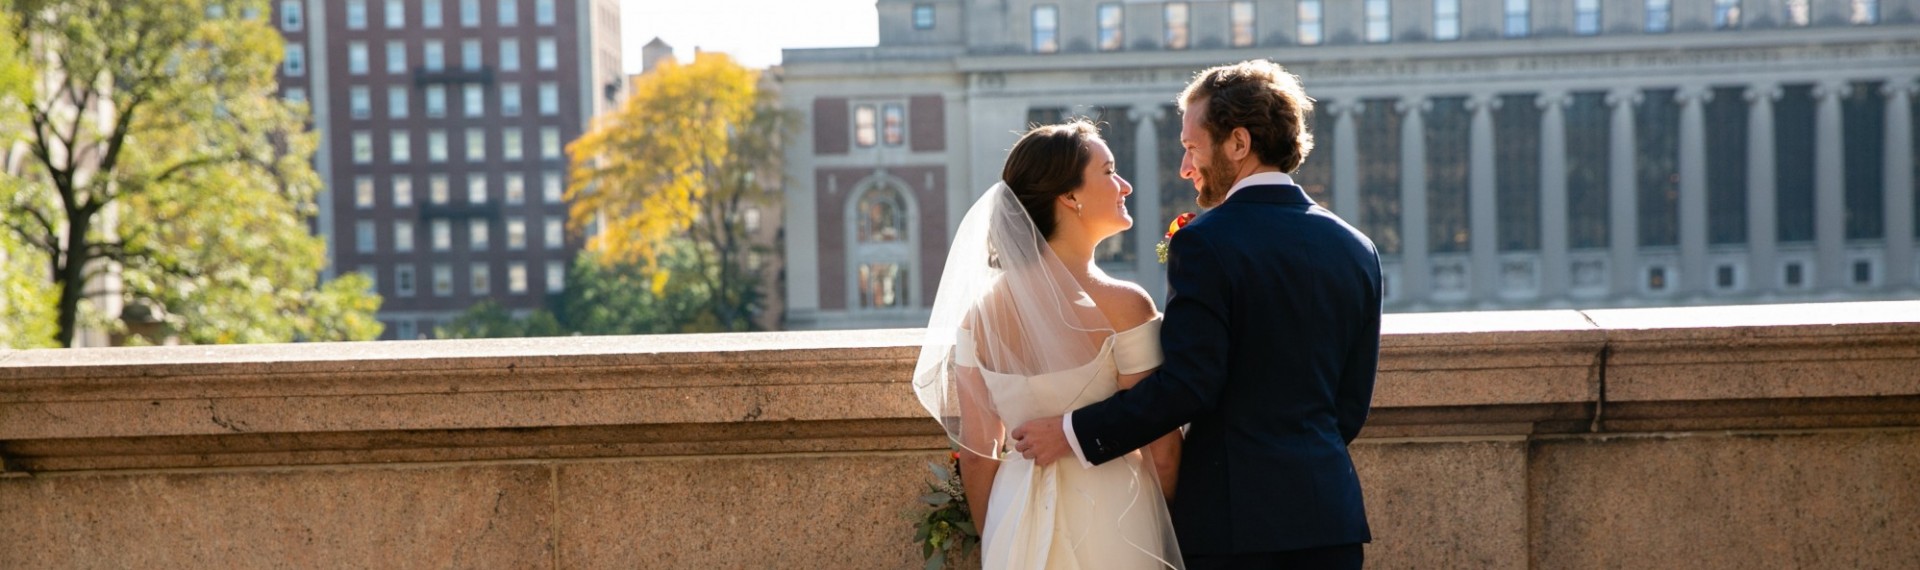 A bride and groom pause to smile at one another. Butler Library is visible in the background.